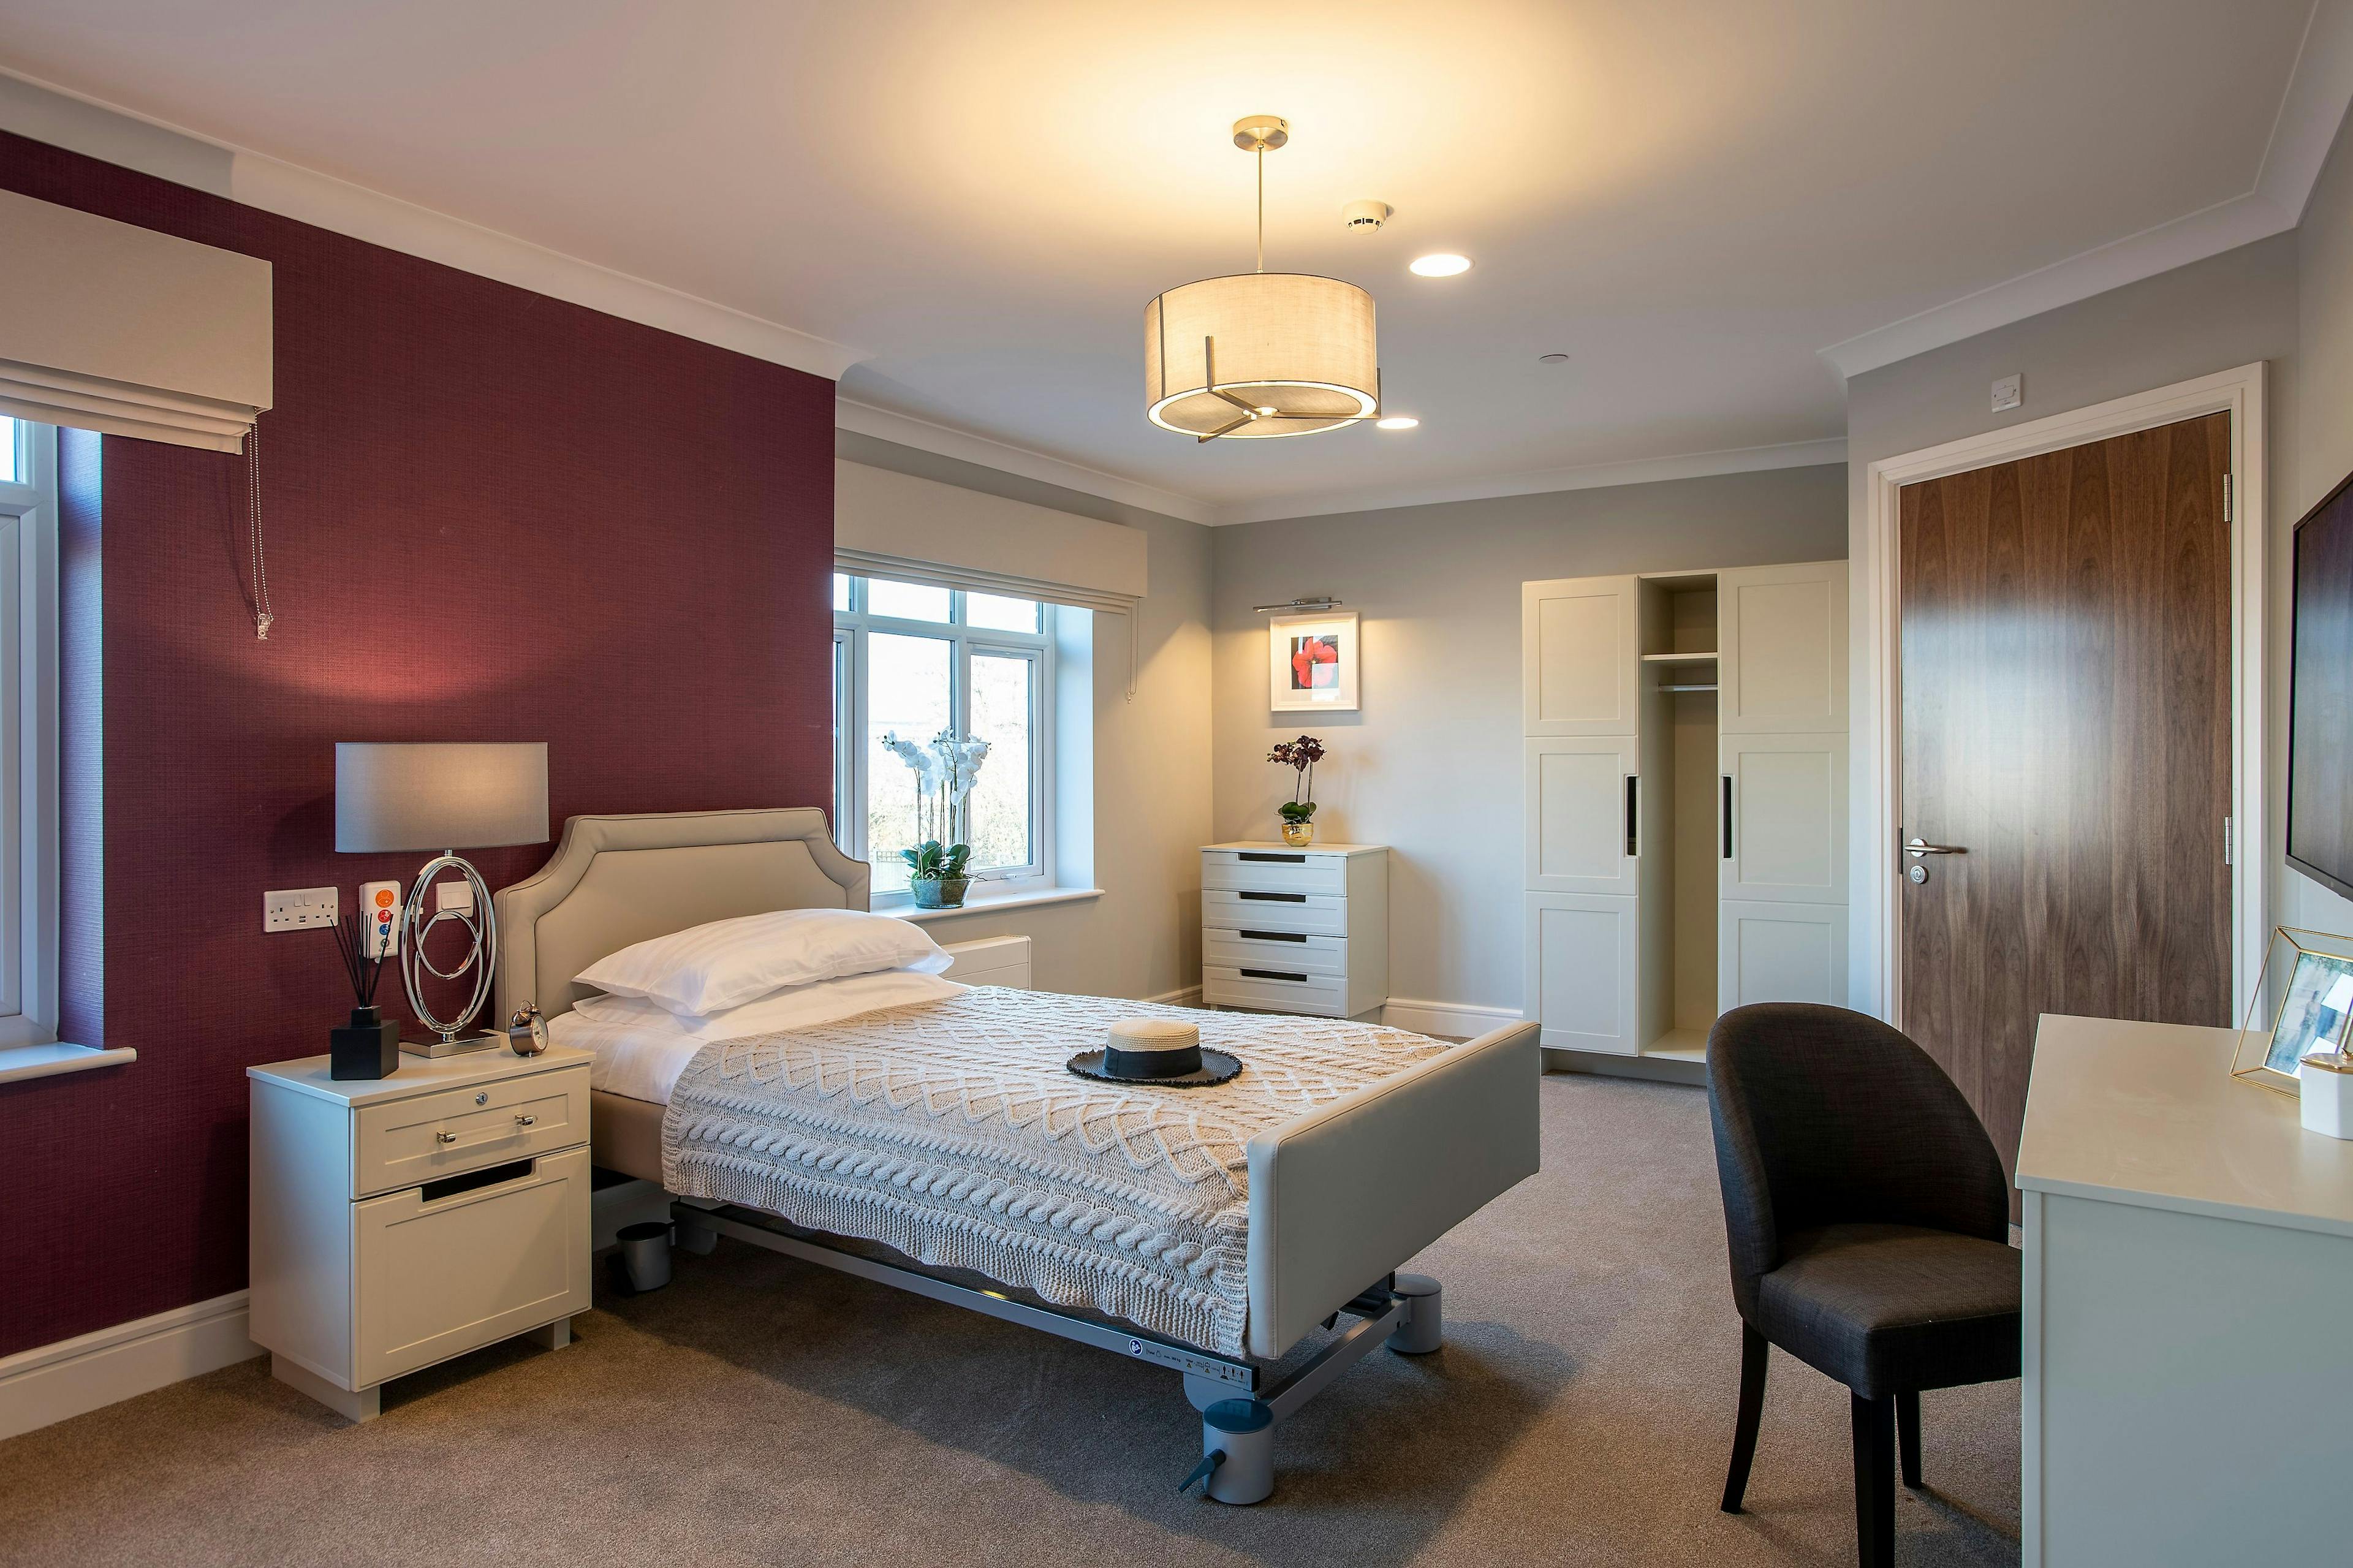 Hamberley Care Homes - Meryton Place care home 10